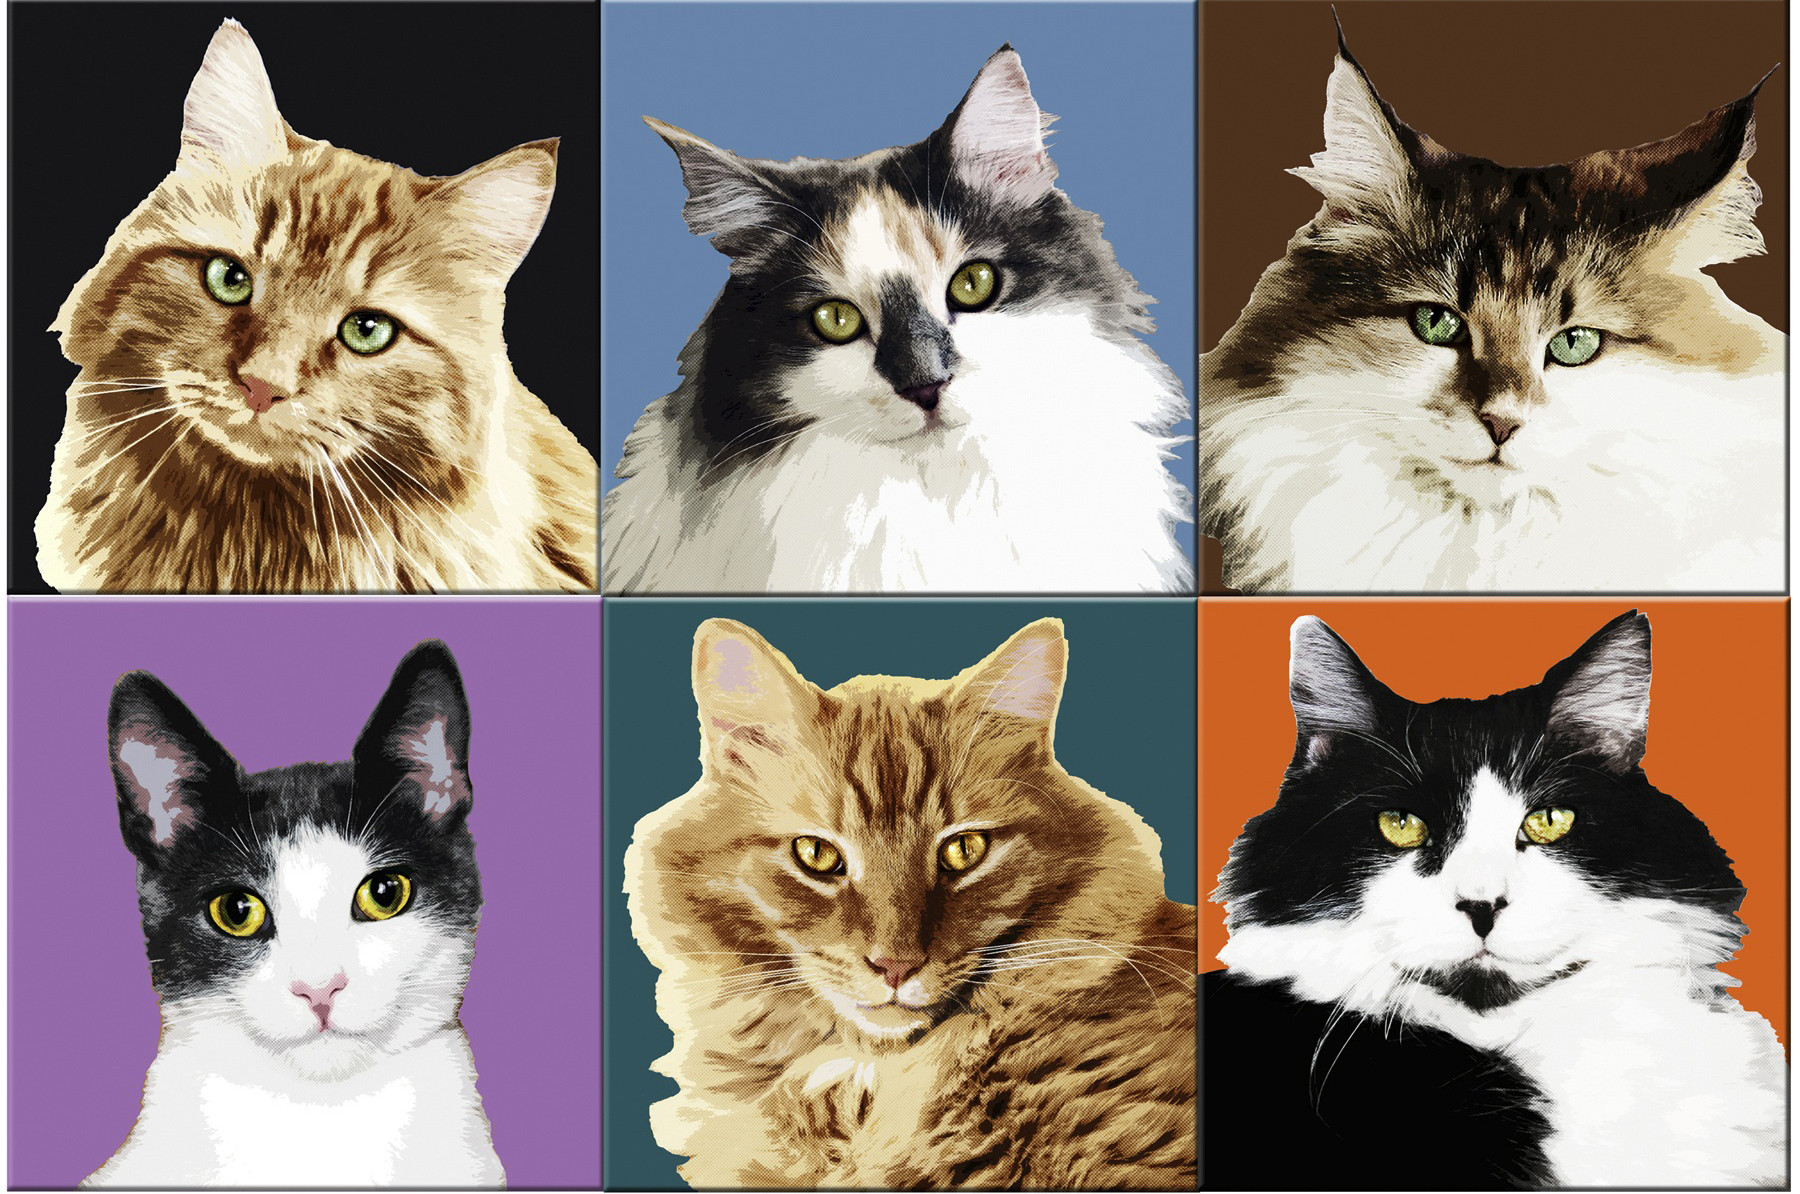 This undated image courtesy of Kim Curinga shows "Cat Portraits," by Curinga. Curinga shot a series of feline portraits and manipulated them in Photoshop to look like pop art. One of the hottest trends in home decor is hanging photographic art, which makes a big impact without costing a lot.      (AP Photo/Kim Curinga ) NO SALES